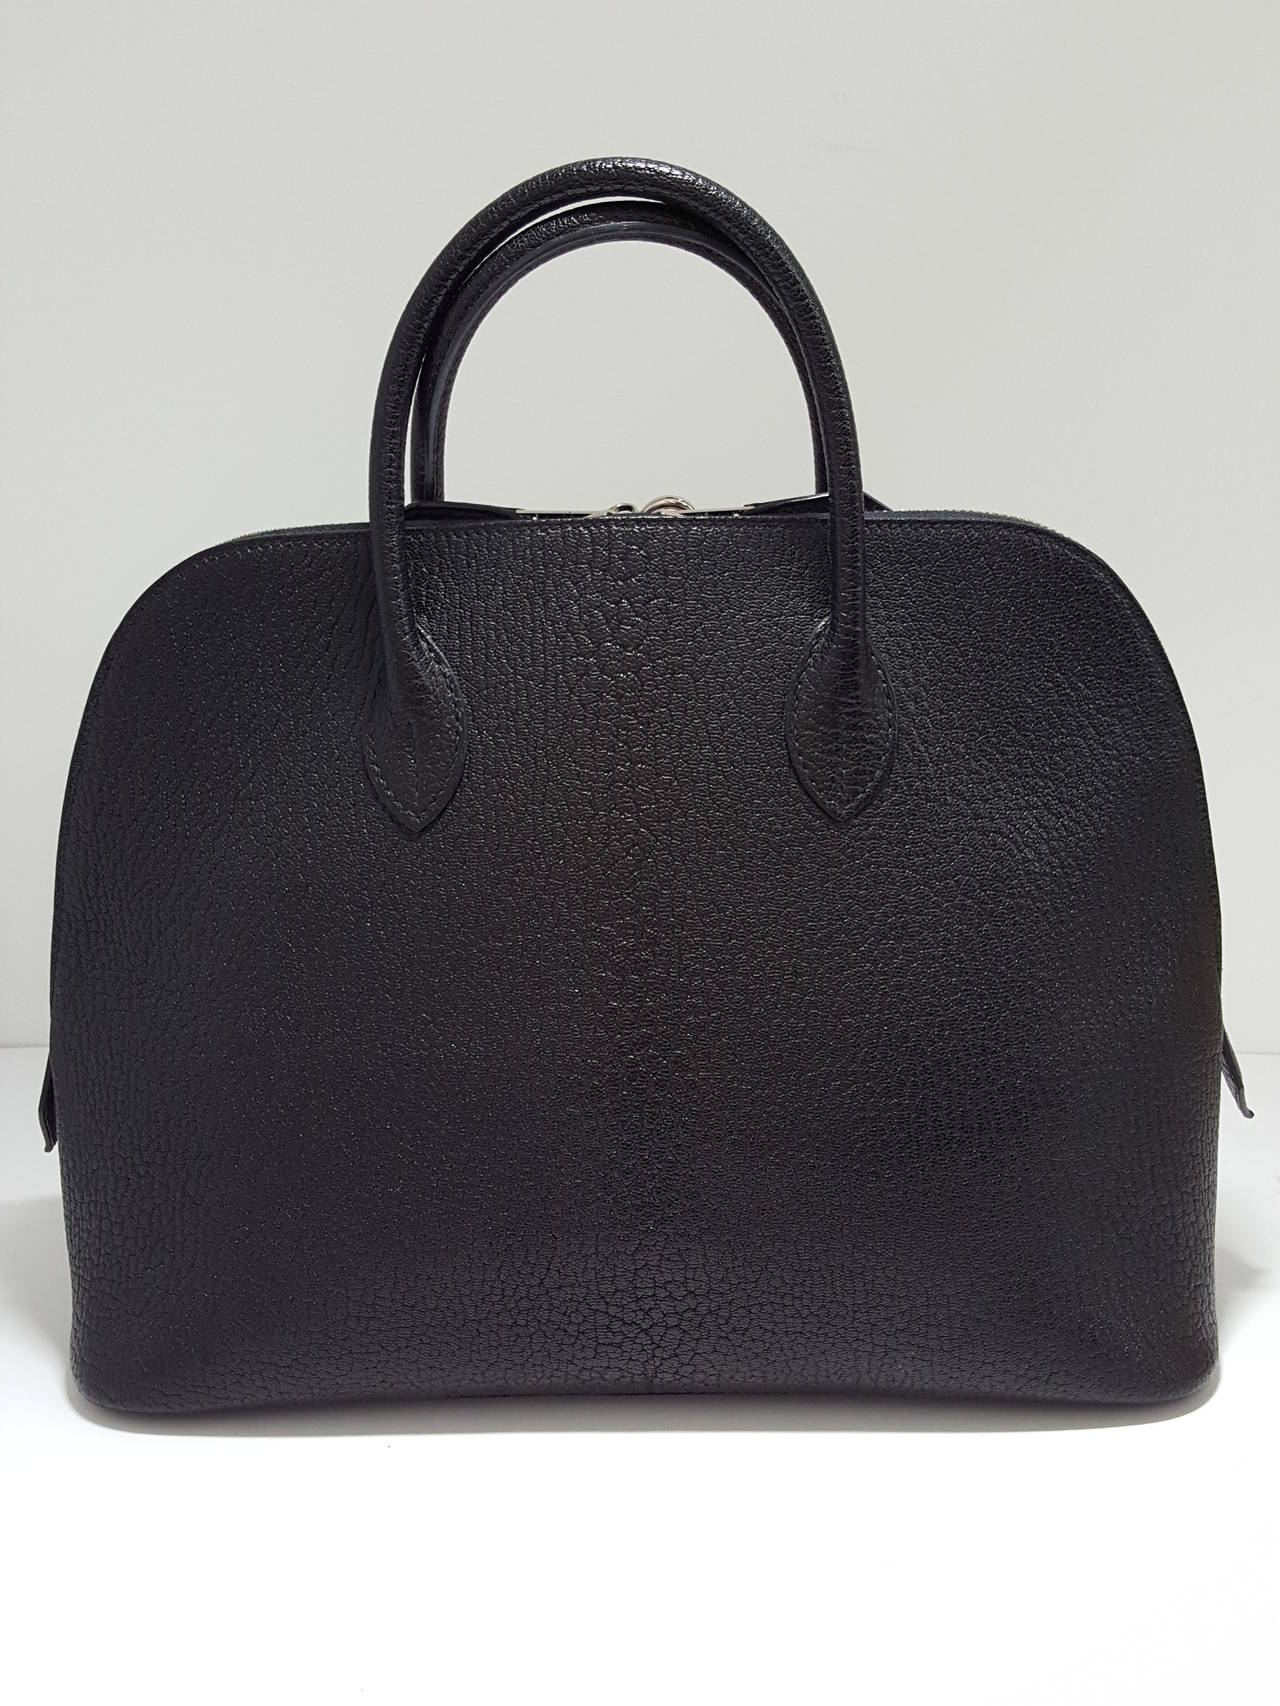 Now here is a fabulous HERMES Bag!  This is the Bolide 31 cm in soft and durable Chevre (Goat hide).  It is lightweight and scratch resistant.  This bag was originally called the Bugatti in 1923 and it was the first bag to have a zipper. The design